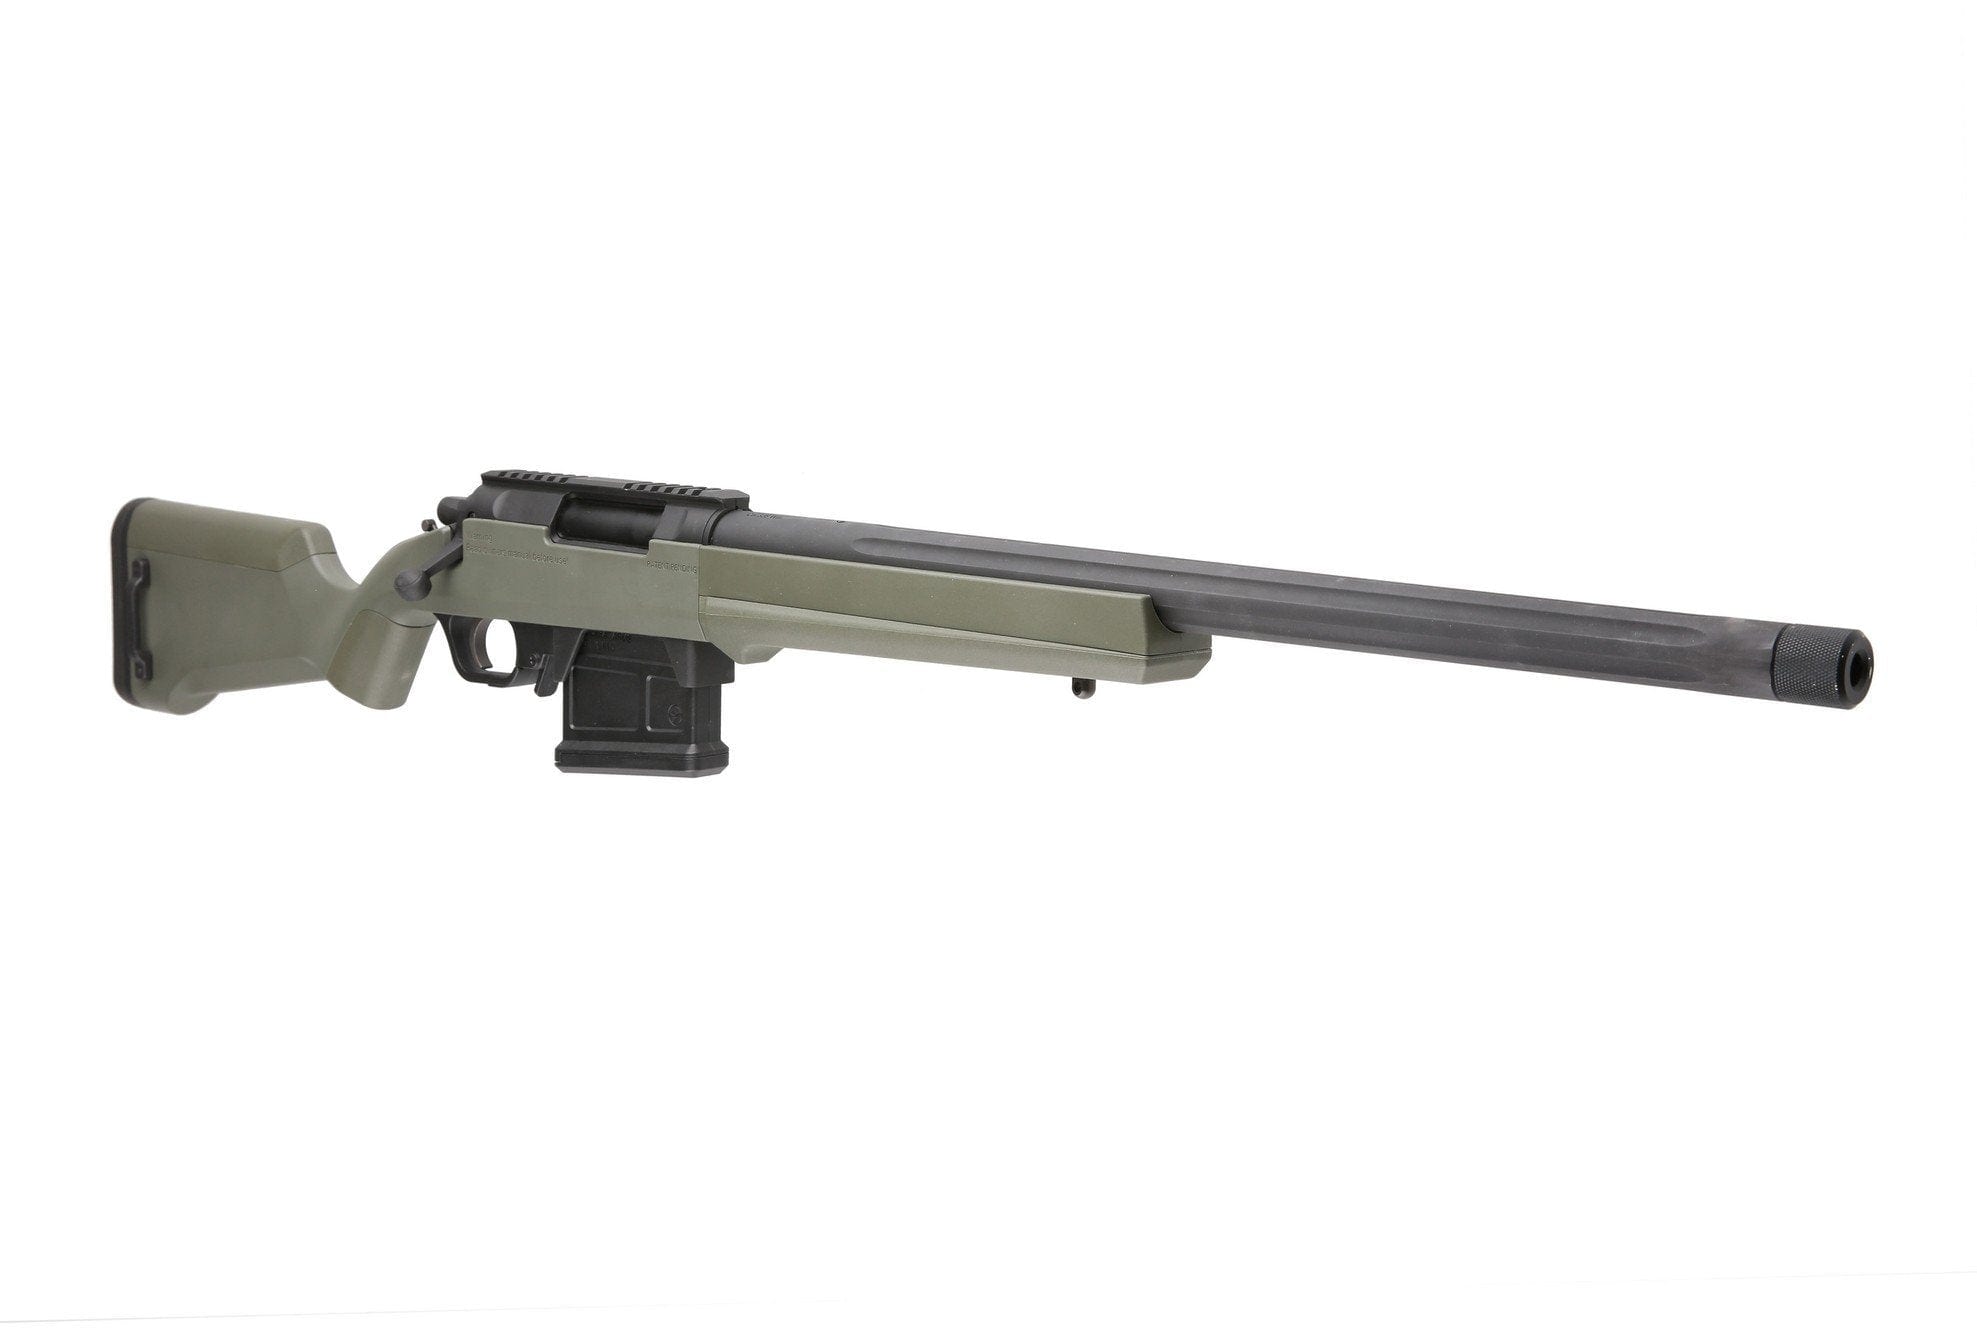 AS-01 Striker Sniper Rifle Replica - Olive Drab by AMOEBA on Airsoft Mania Europe